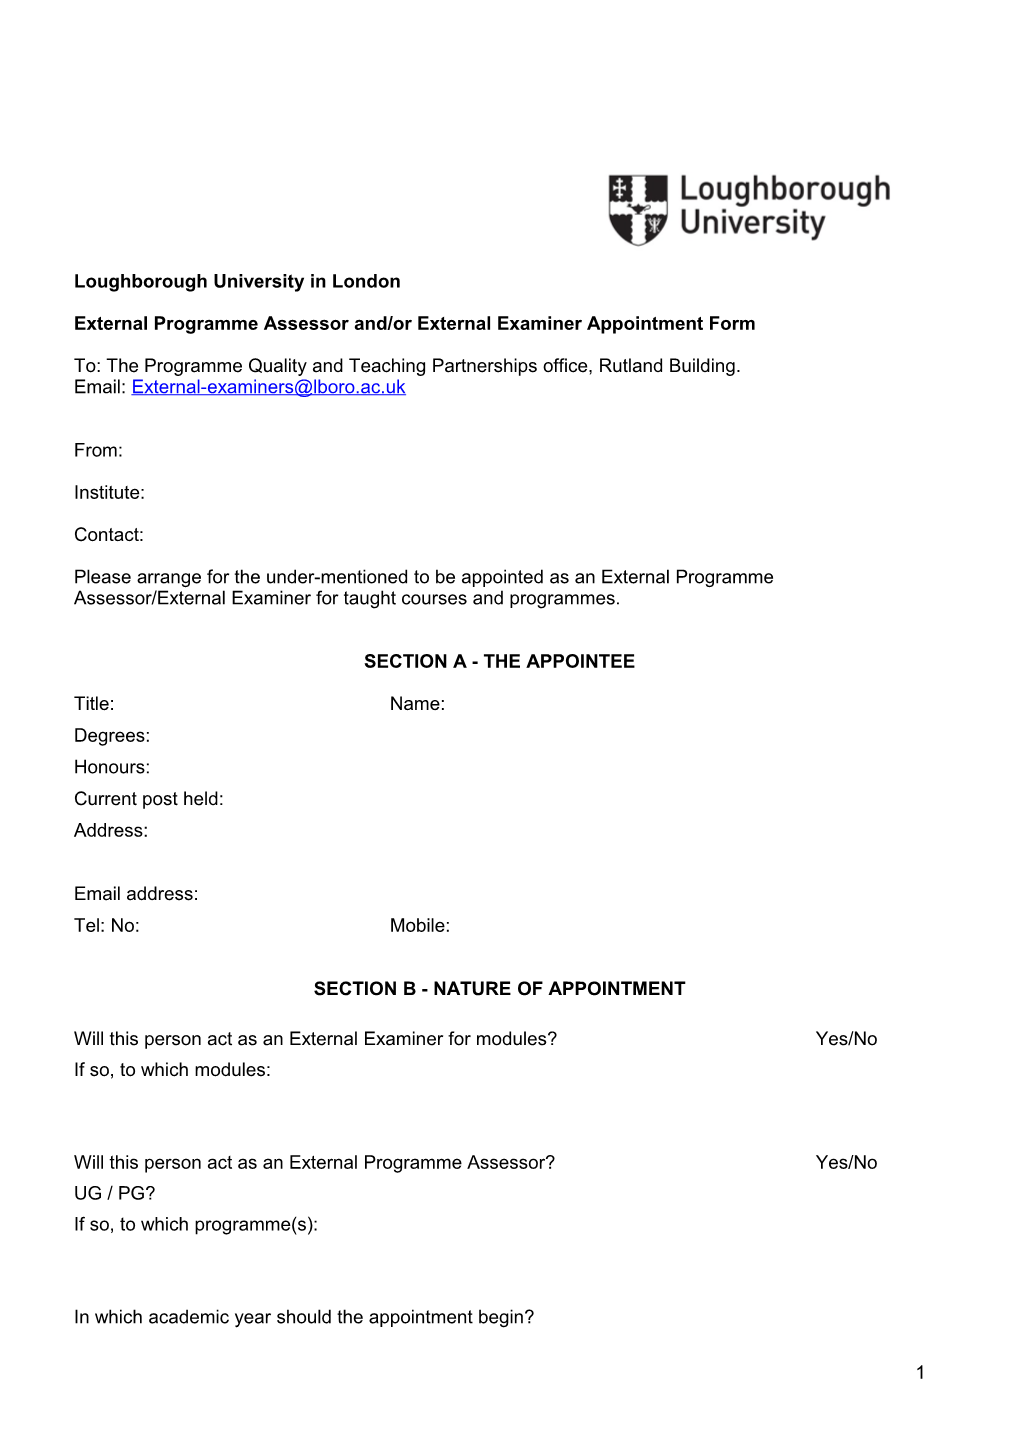 External Programme Assessor And/Or External Examiner Appointment Form